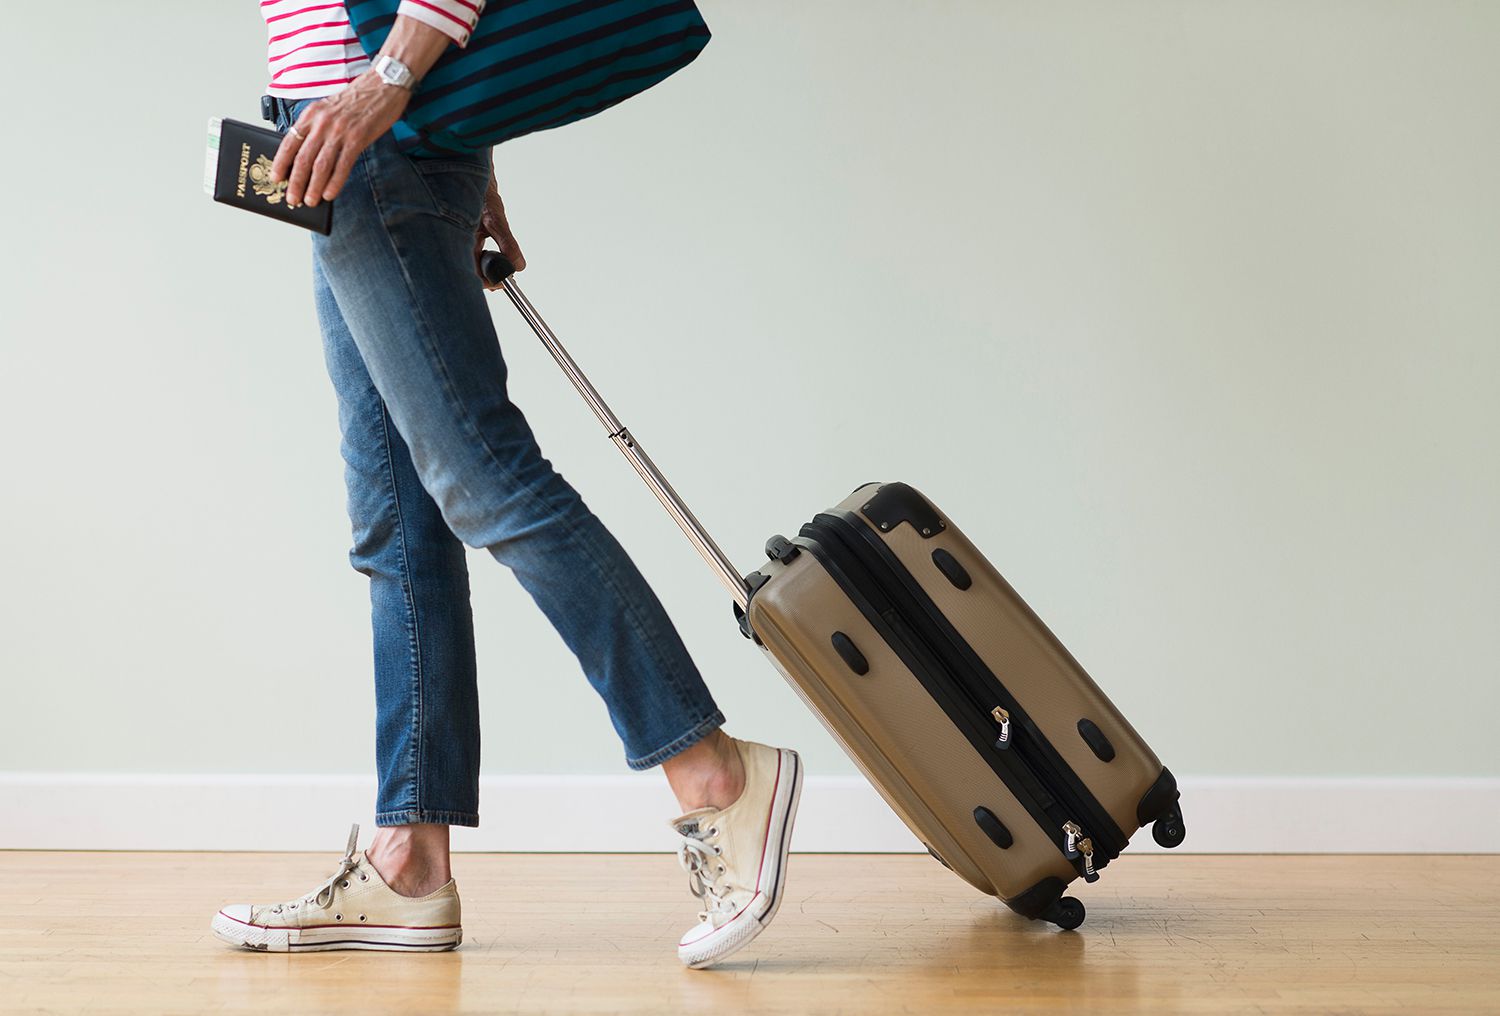 Suitcase Carry: Benefits, Precautions, and How to Perform